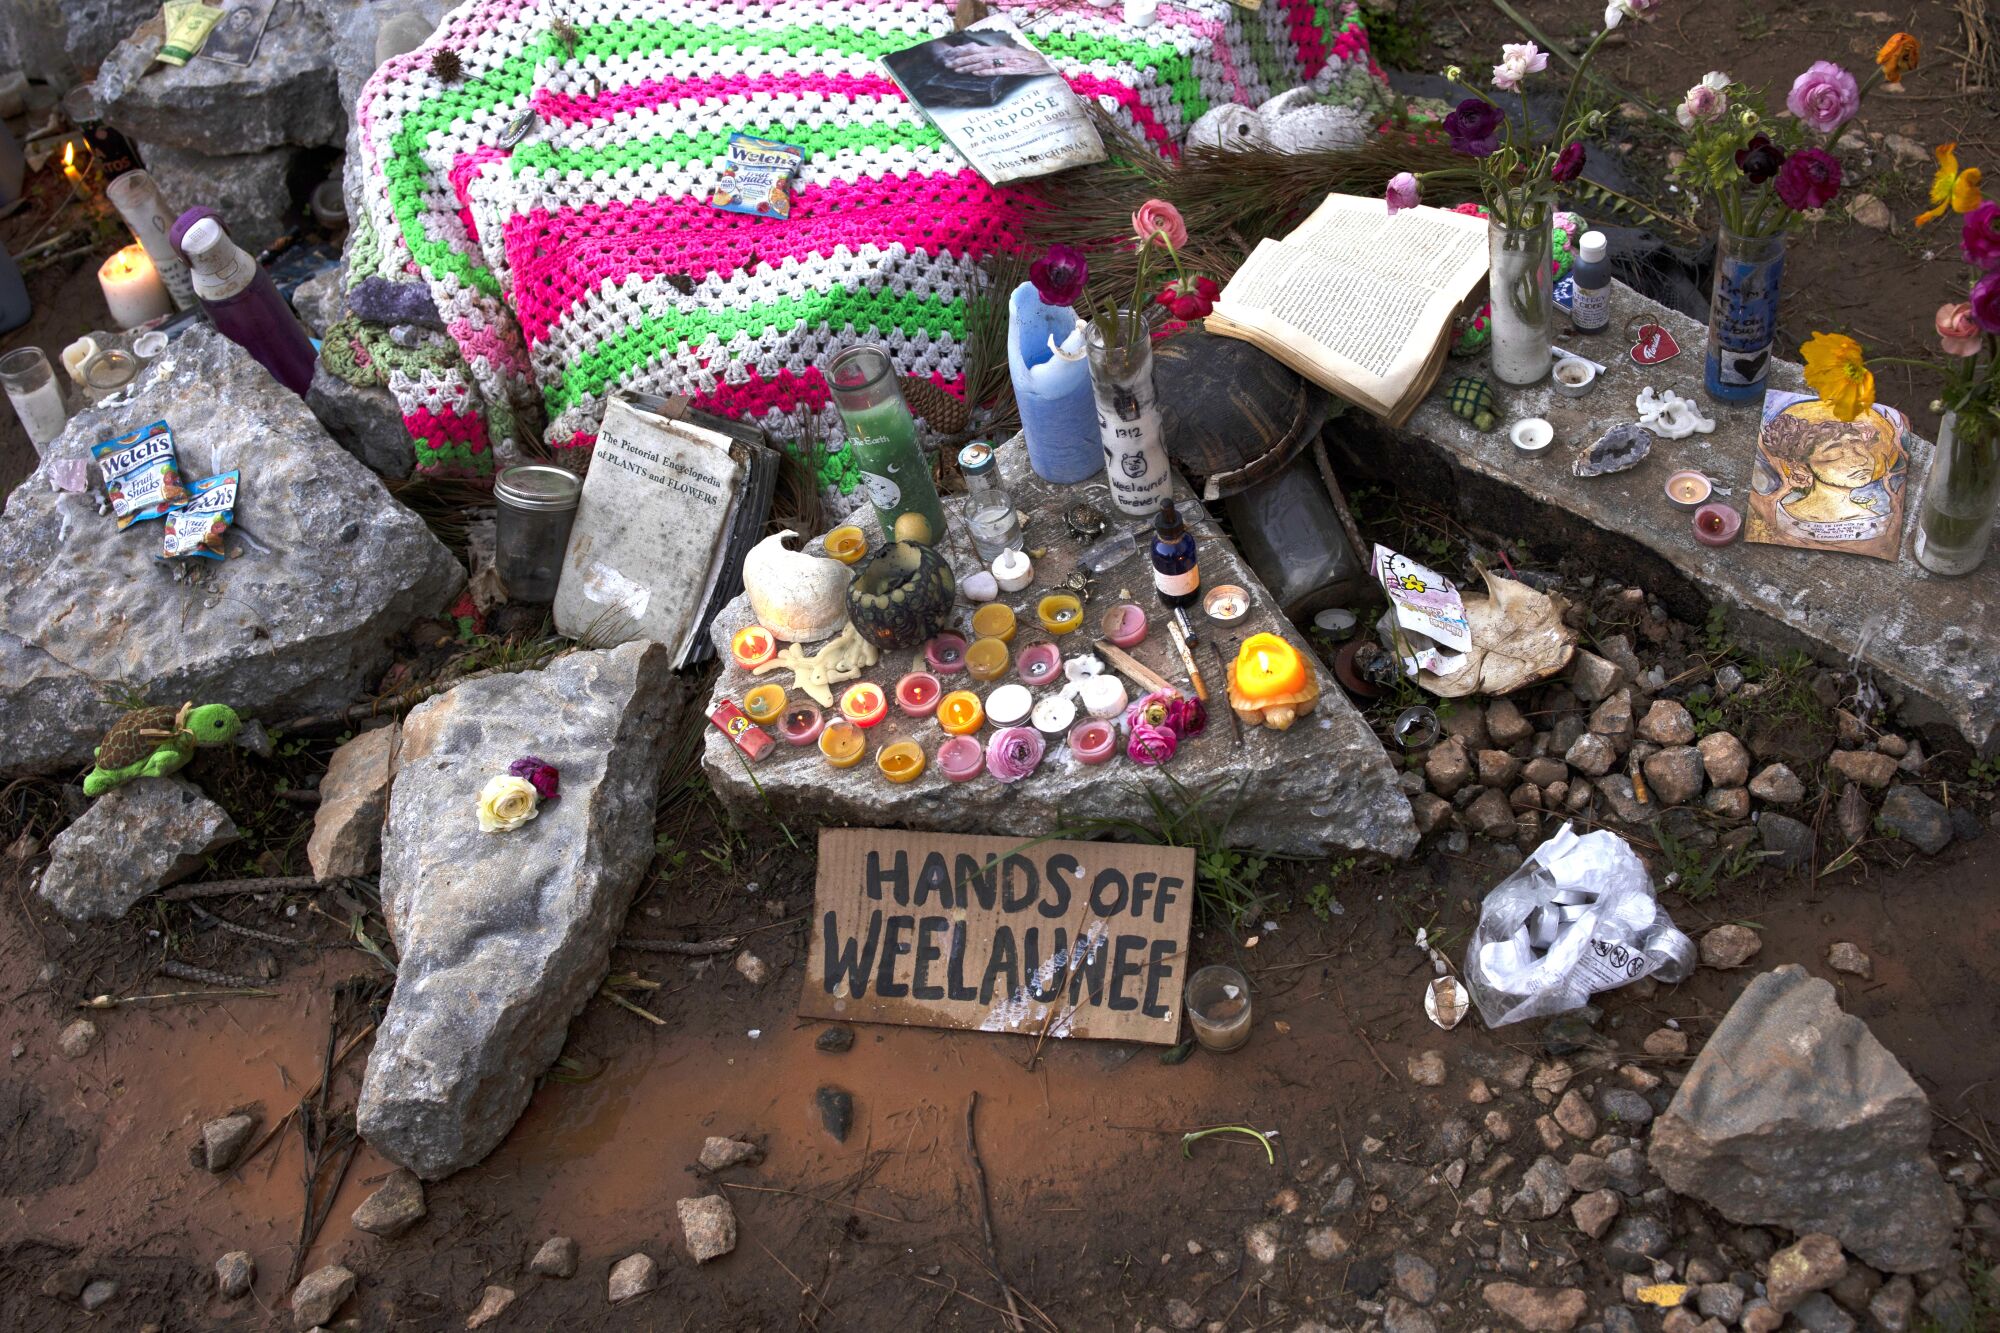 A cardboard sign near candles and rocks reads "Hands off Weelaunee."